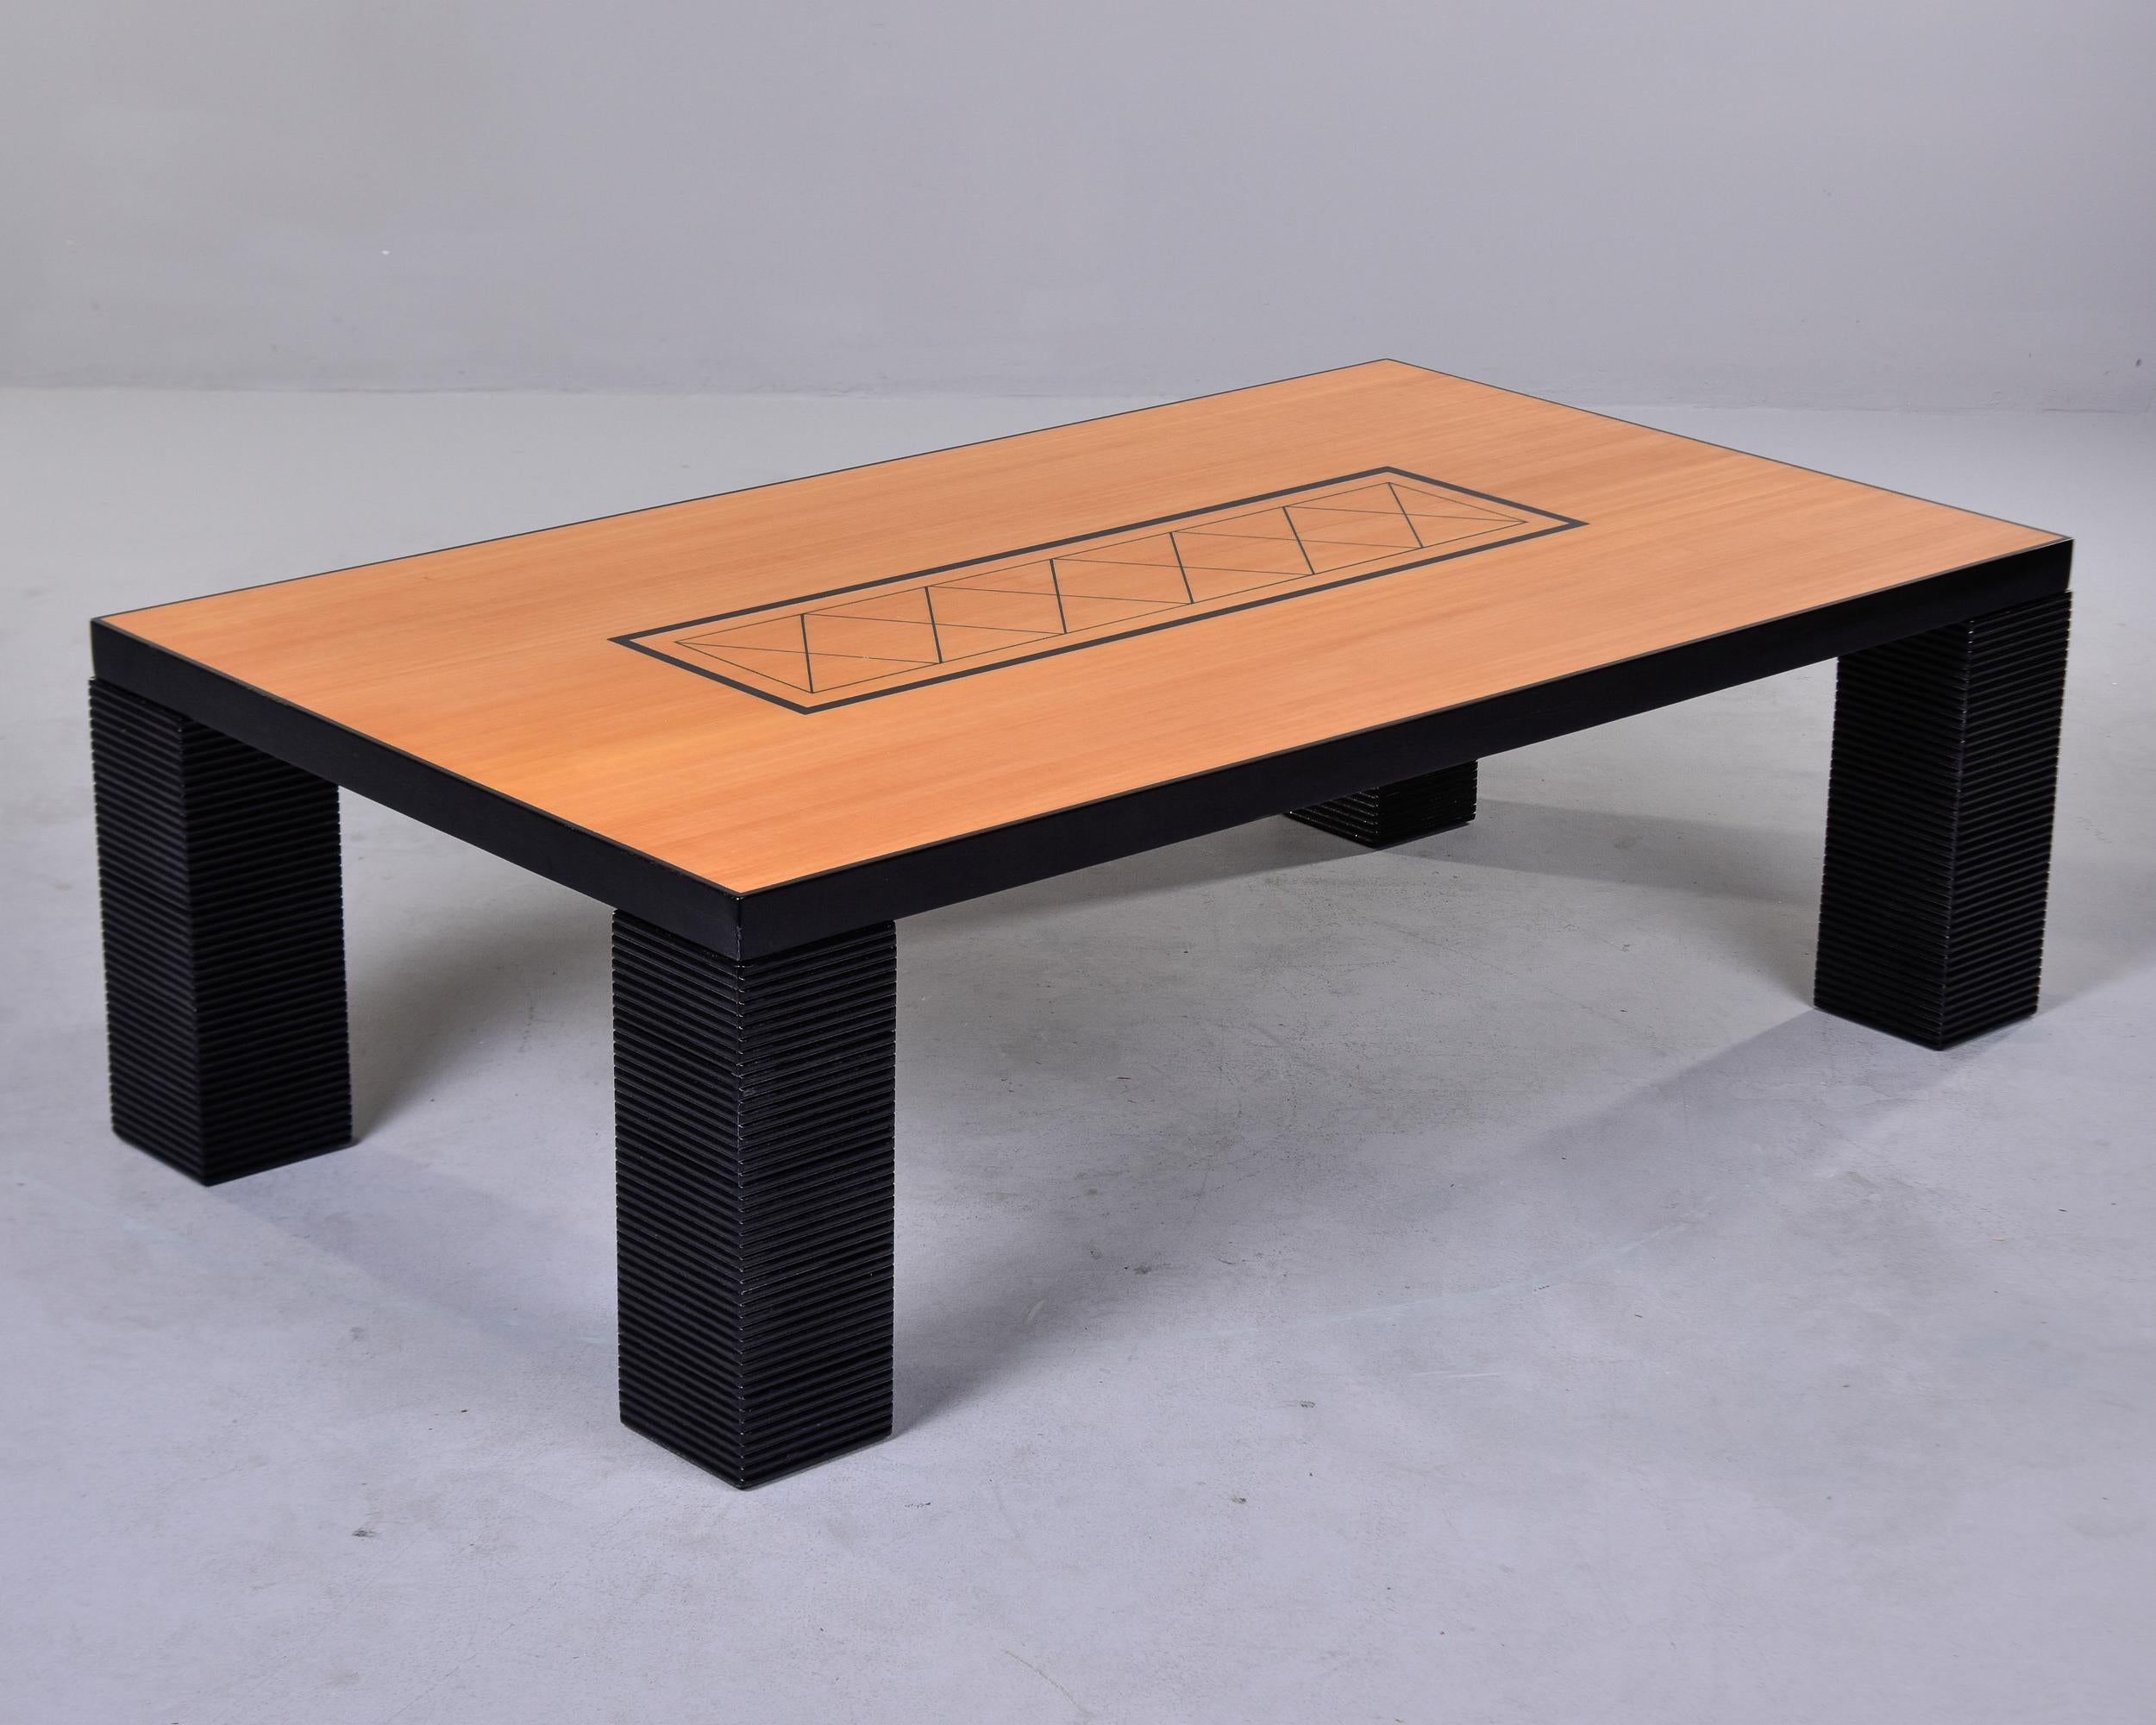 Oversized Italian Art Deco Birch and Black Coffee Table For Sale 2